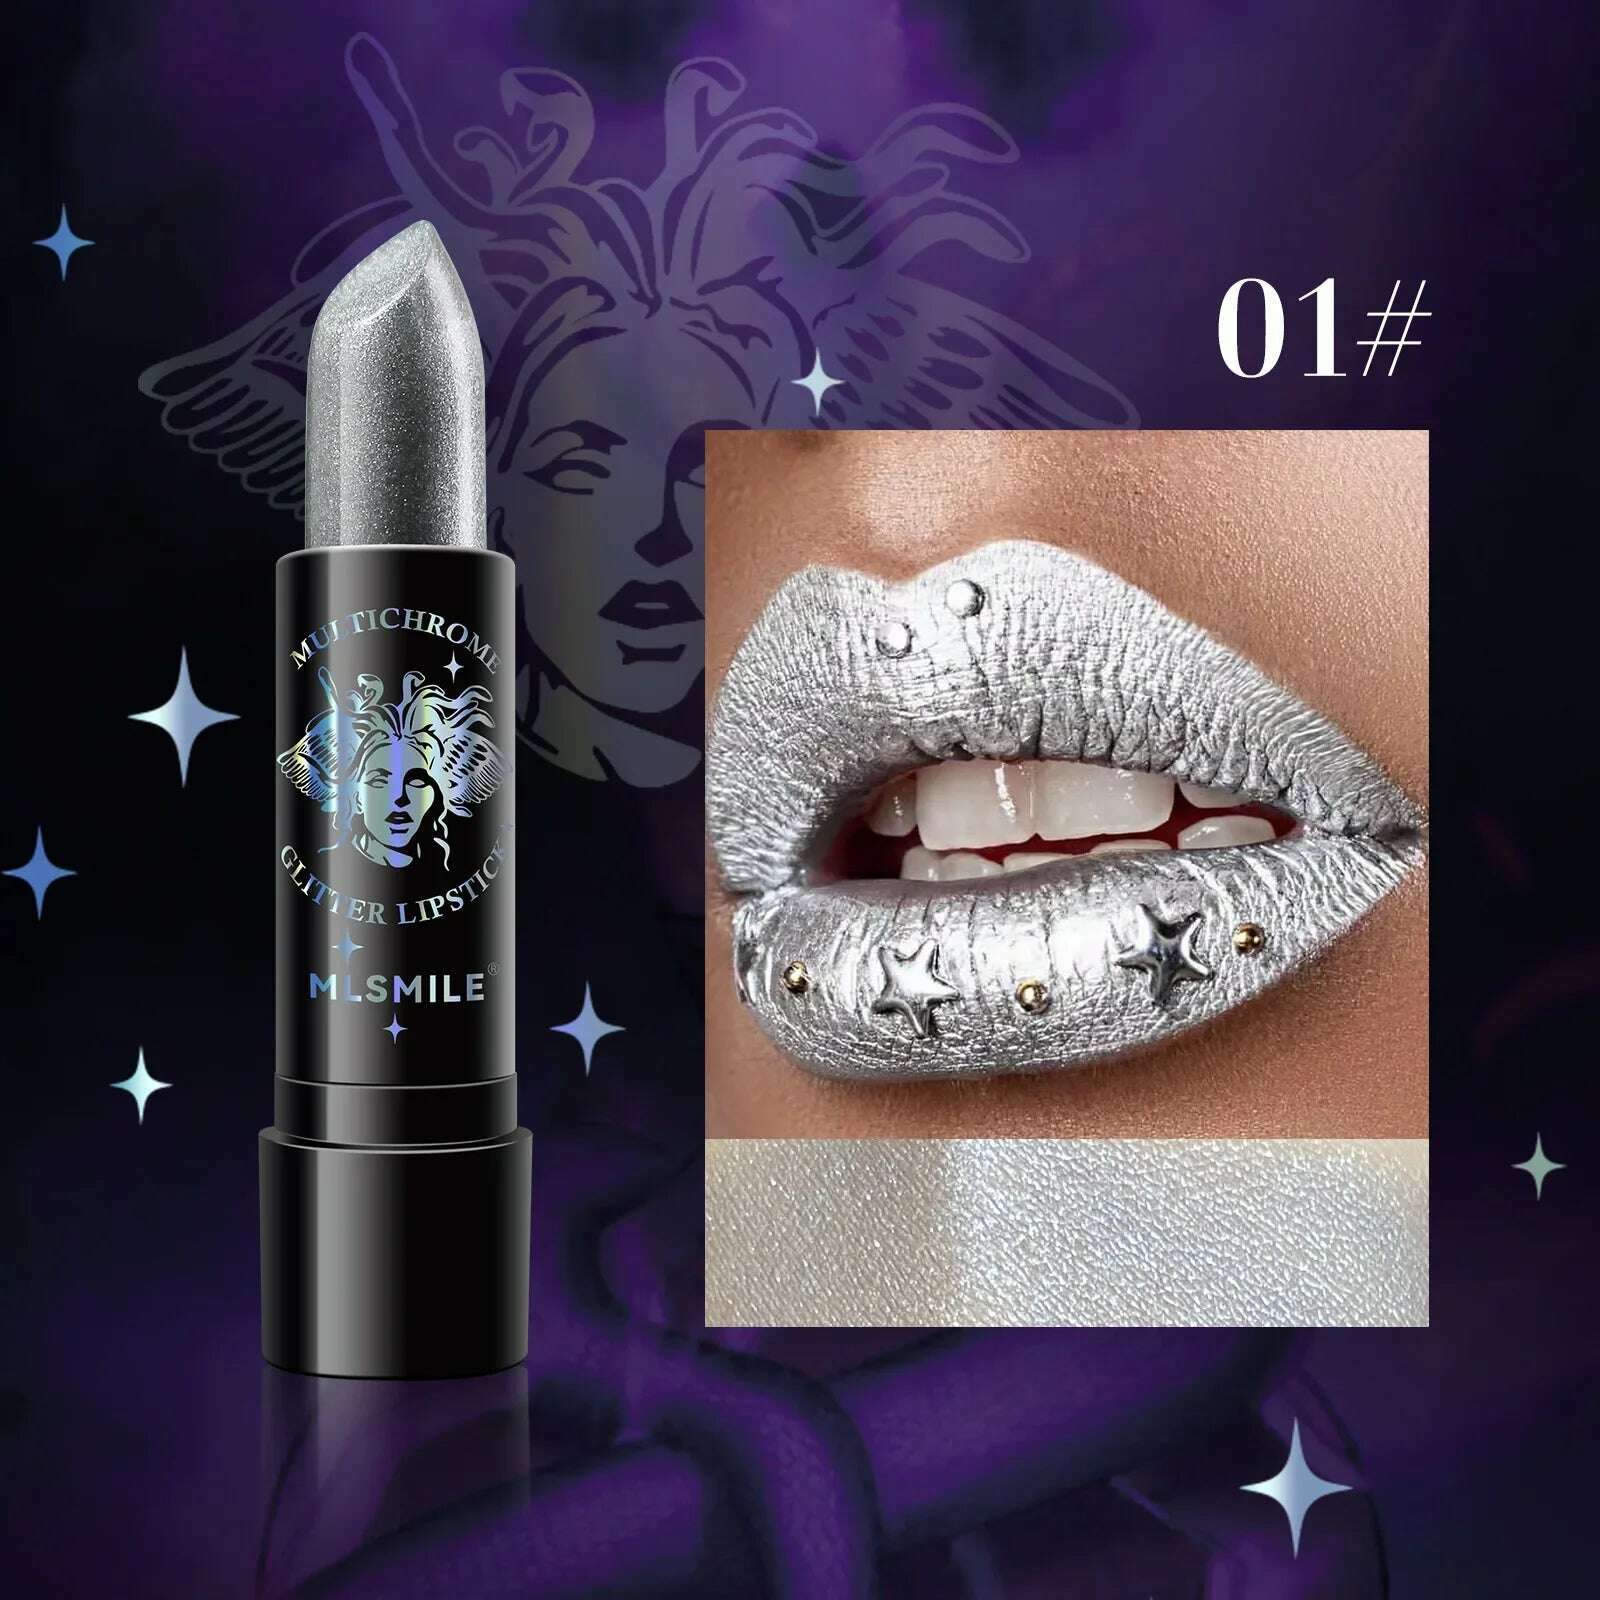 KIMLUD, Waterproof Glitter Matte Lipstick Long Lasting Color Rendering Non-stick Cup Velvet Shiny Lipsticks Silver Gold Sexy Lips Makeup, A01, KIMLUD Womens Clothes